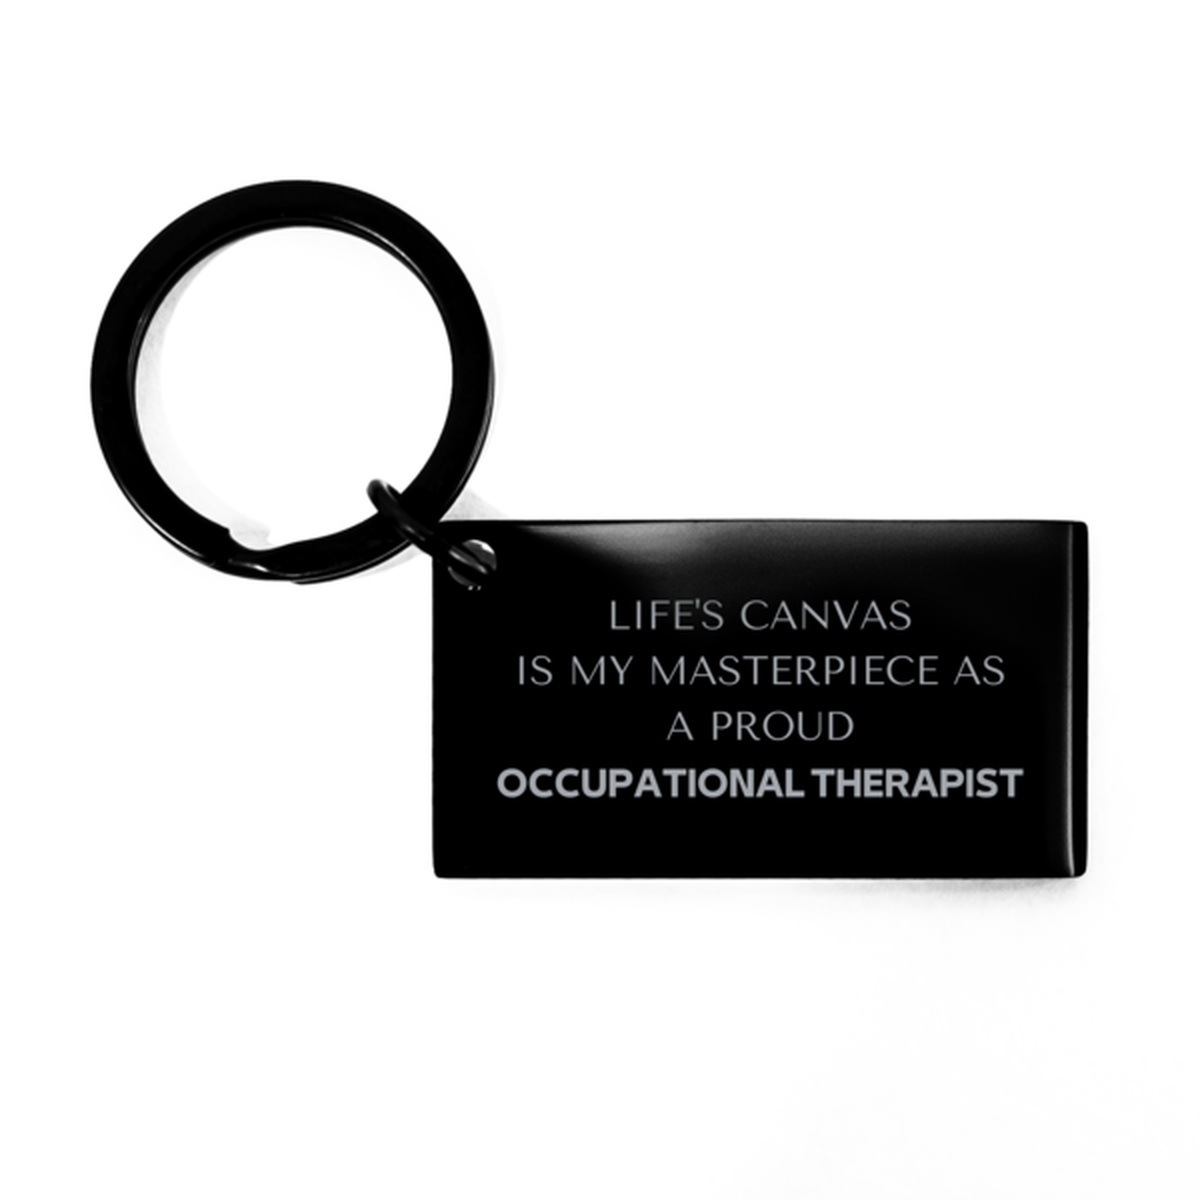 Proud Occupational Therapist Gifts, Life's canvas is my masterpiece, Epic Birthday Christmas Unique Keychain For Occupational Therapist, Coworkers, Men, Women, Friends